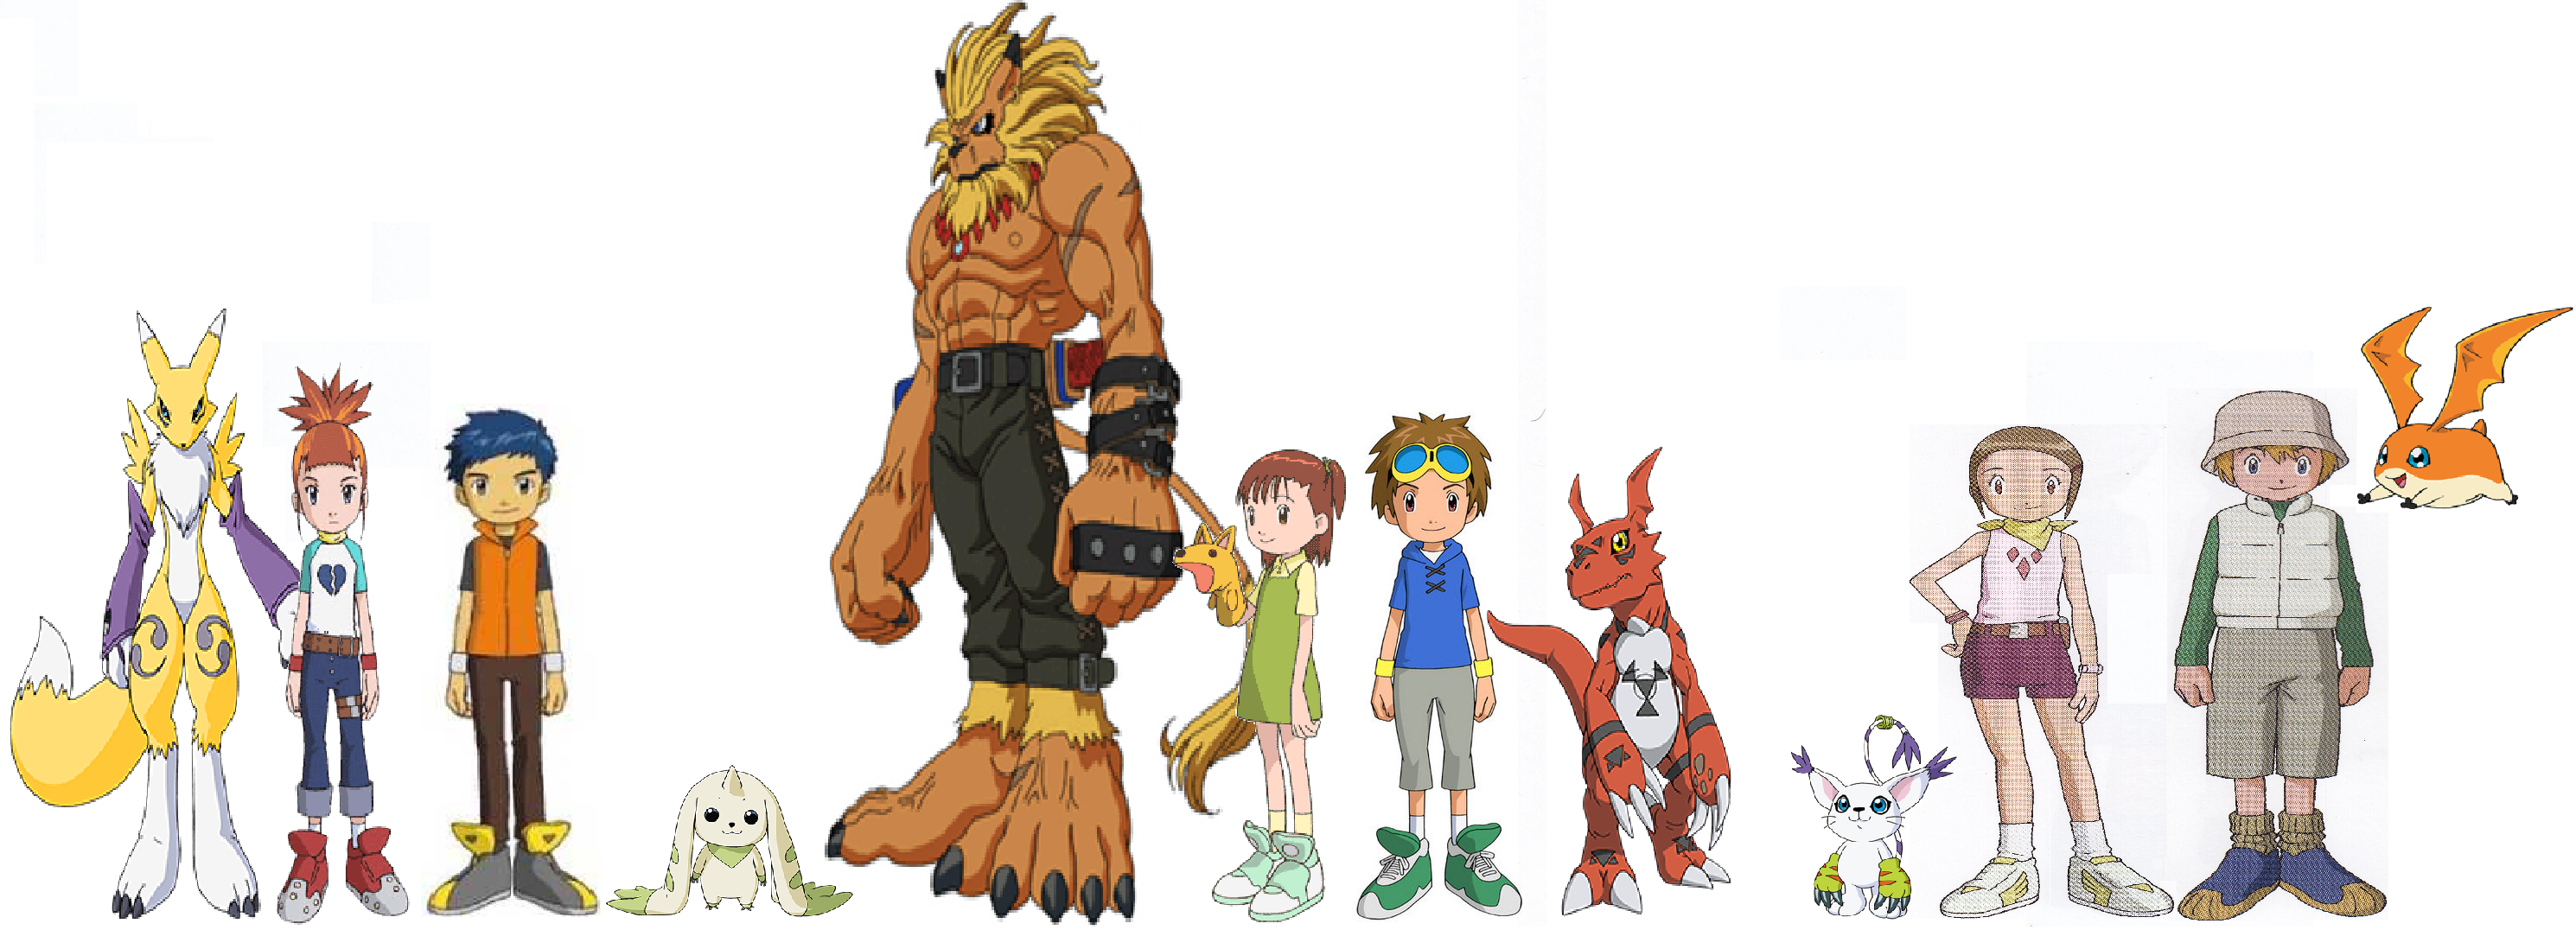 Digimon tri. Character and Partner by Michi-TamiTxM on DeviantArt